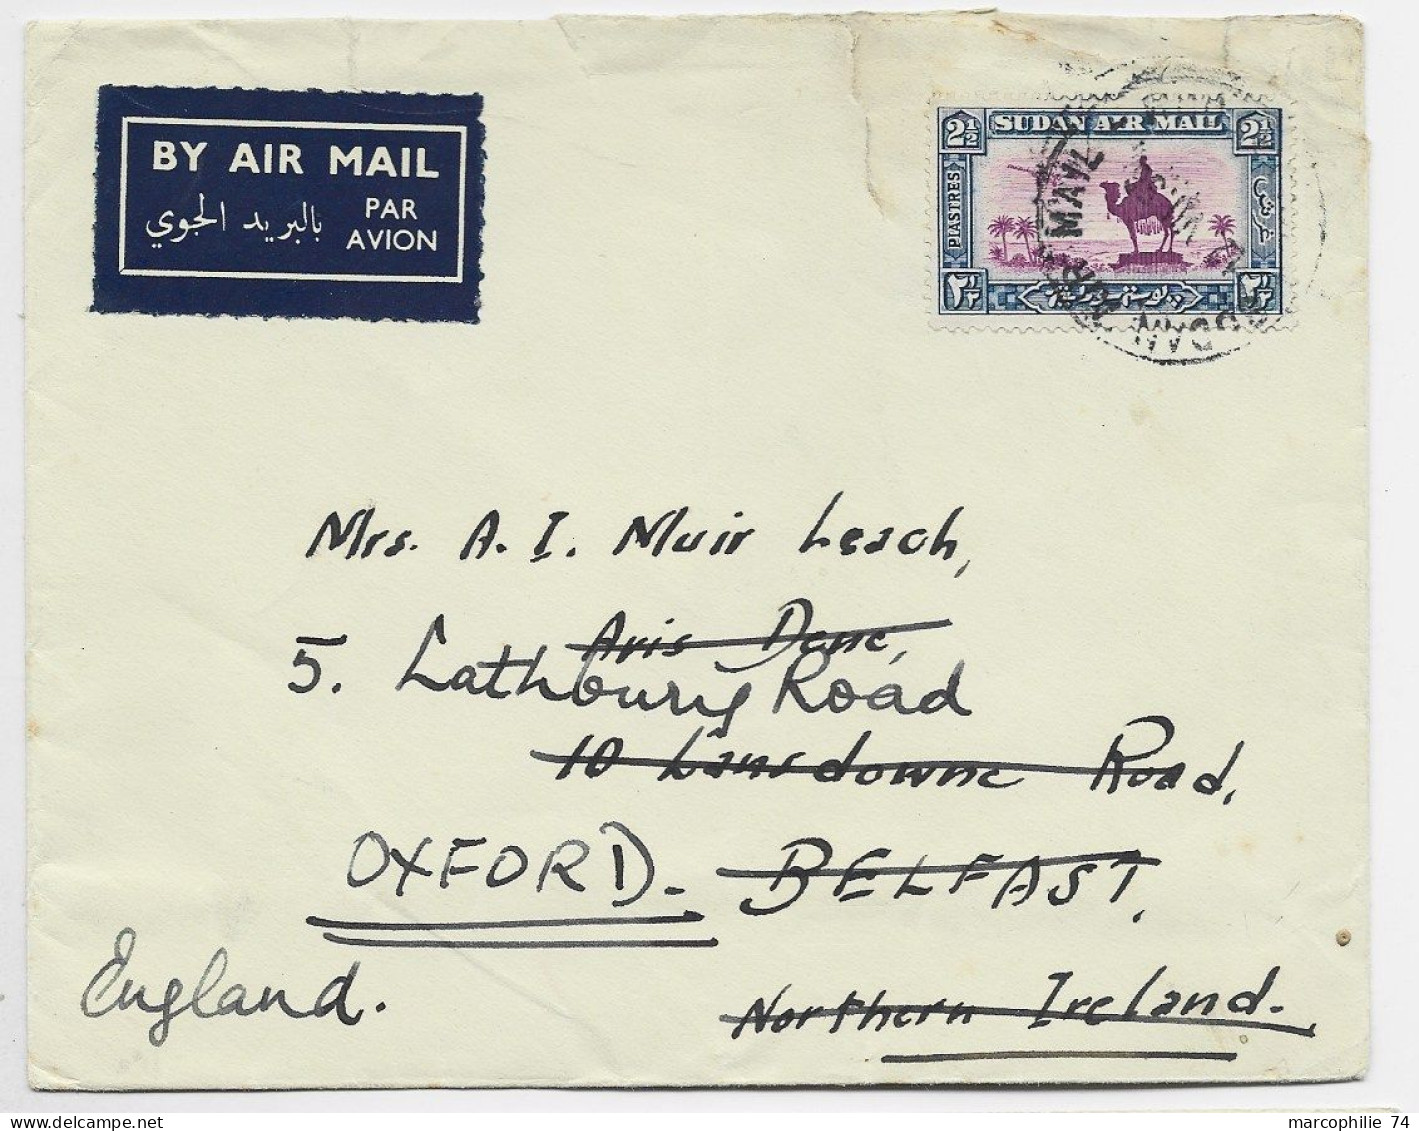 SUDAN AIR MAIL 2 1/2 SOLO LETTRE COVER AIR MAIL 1936  TO IRLAND REEX ENGLAND - Sudan (...-1951)